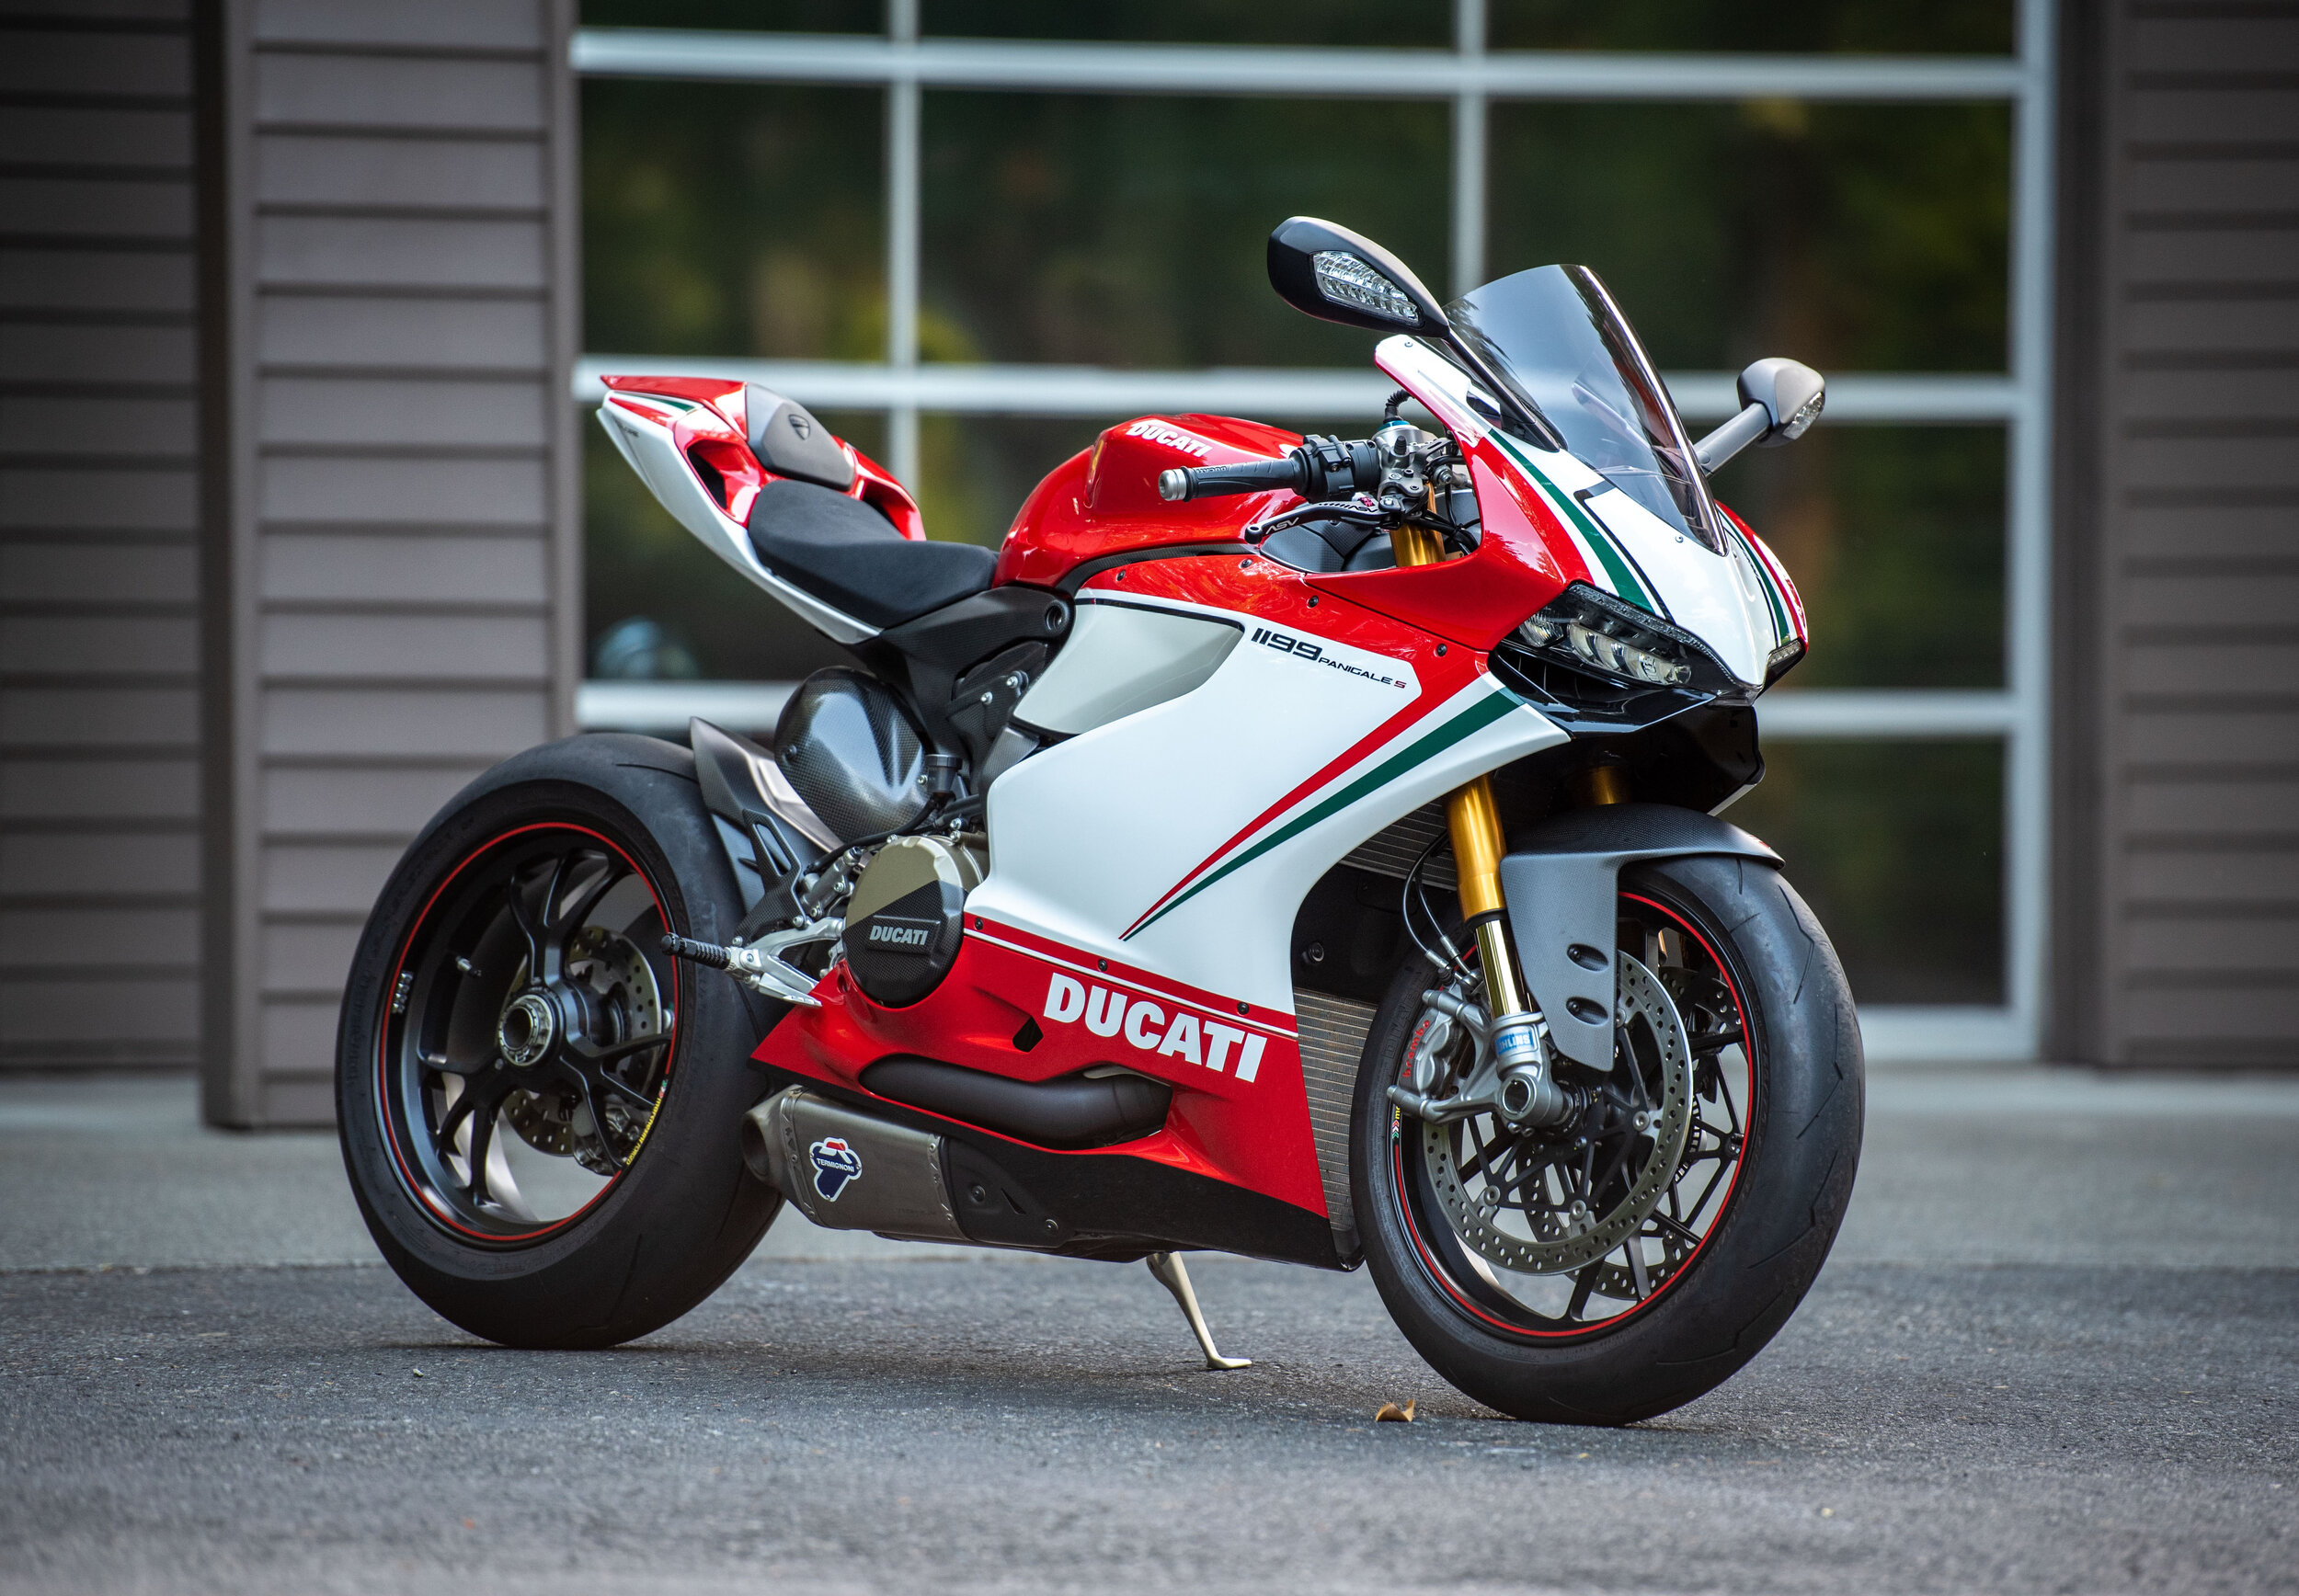 Ducati Panigale 1199 Naked for your viewing pleasure